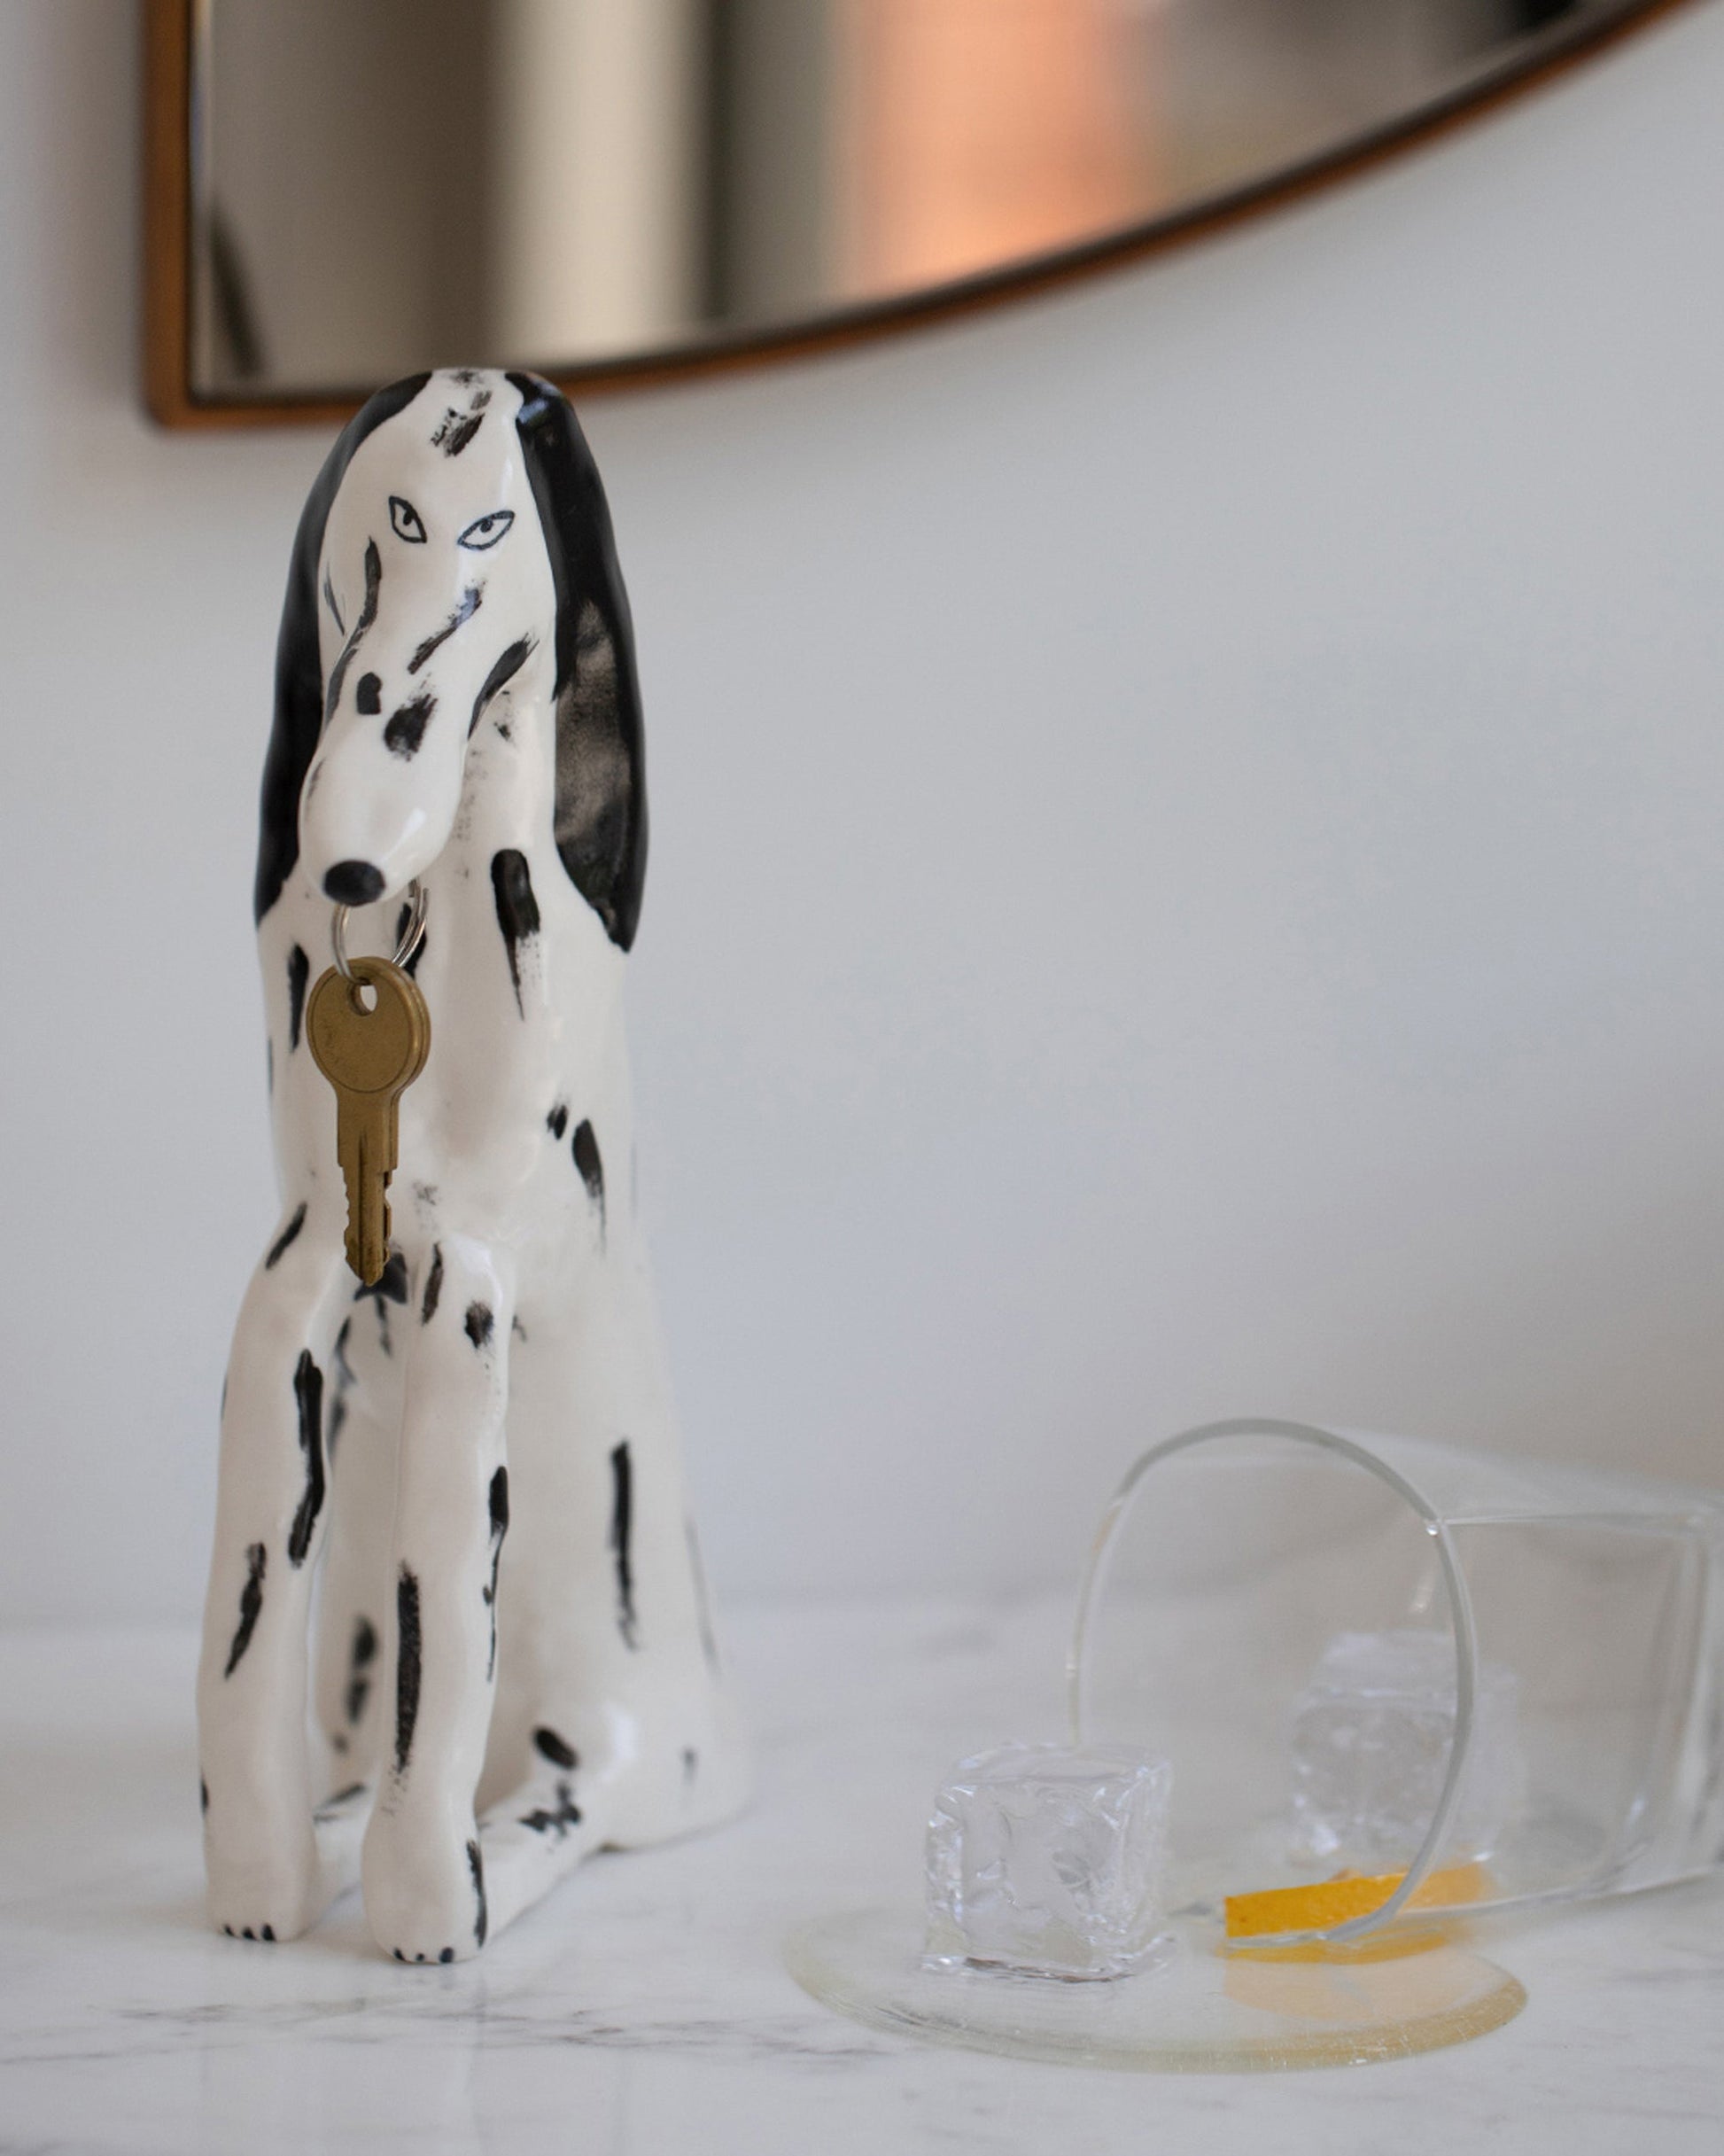 Styled image featuring the Eleonor Boström Key Dog.